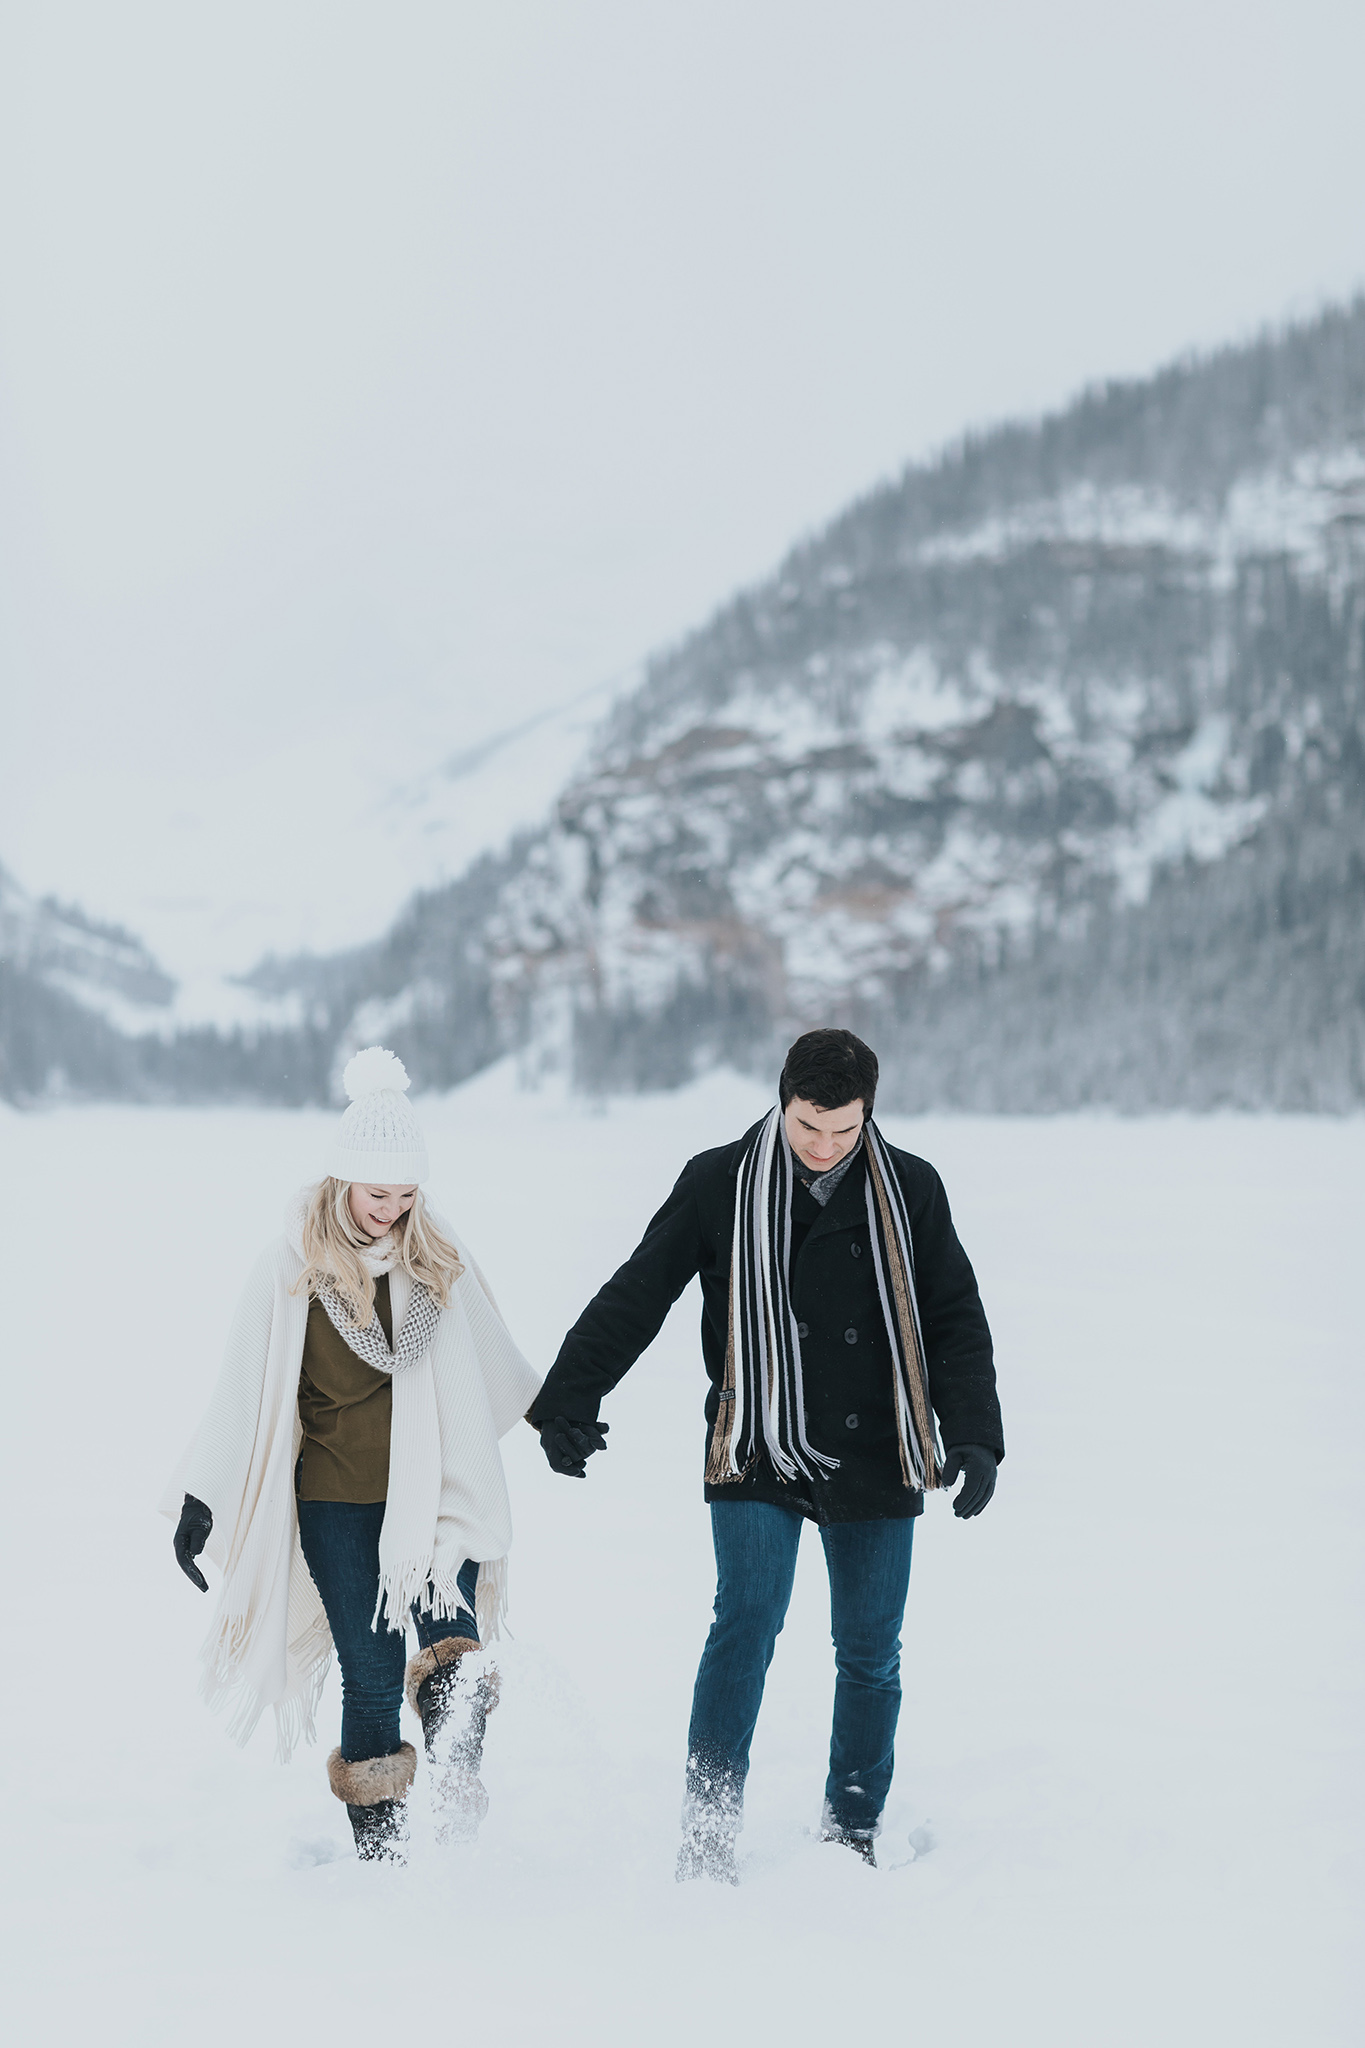 couples session playing in the snow during a winter wonderland in the Canadian Rocky mountains